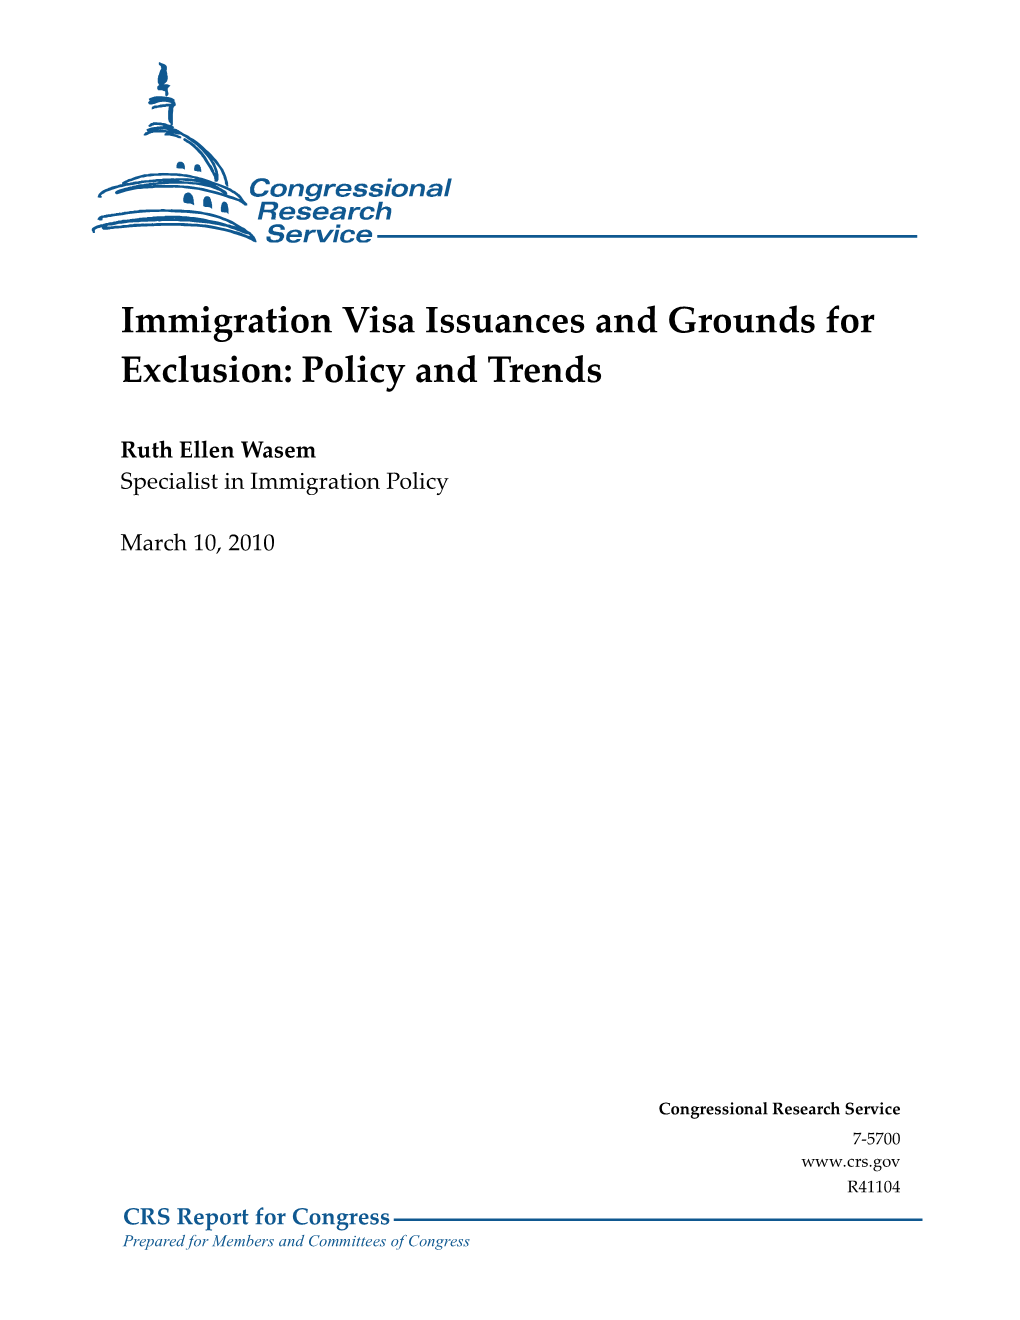 Immigration Visa Issuances and Grounds for Exclusion: Policy and Trends